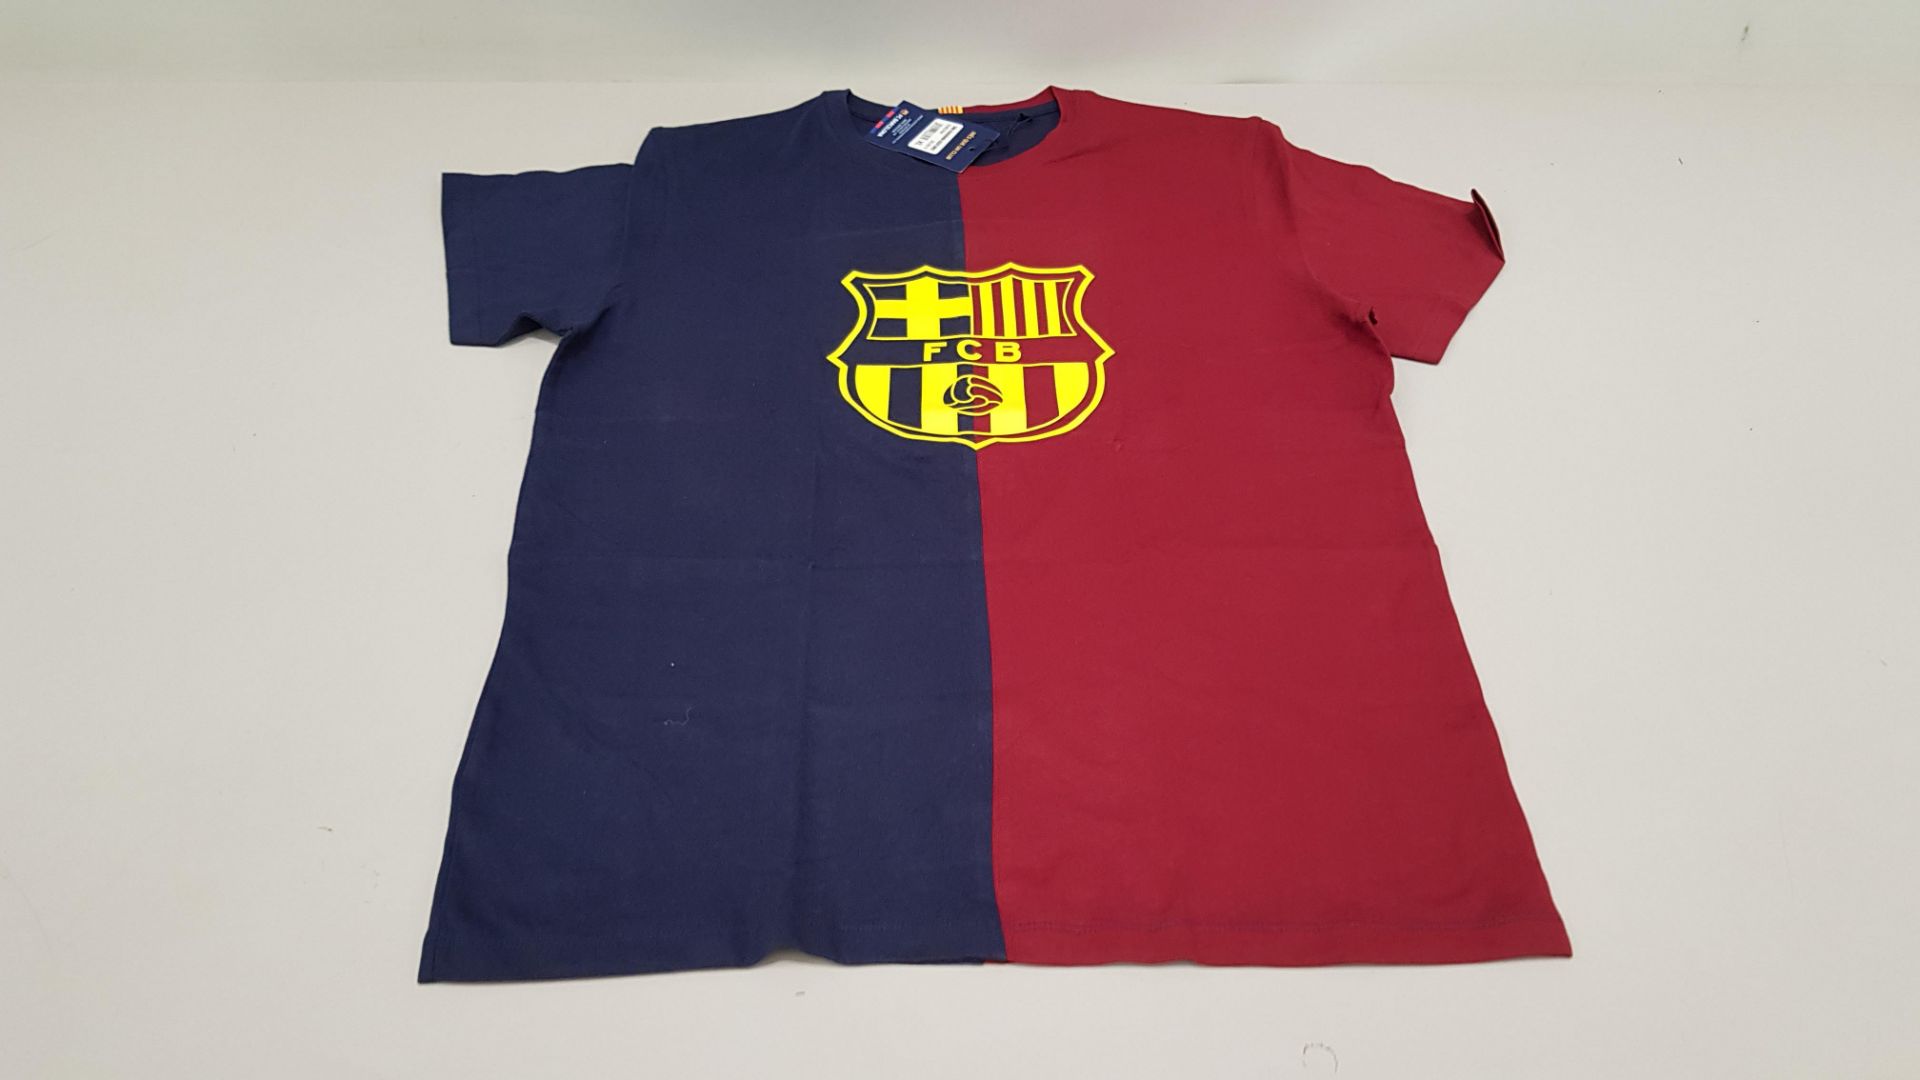 20 X BRAND NEW BARCA STORE OFFICIAL MERCHANDISE FC BARCELONA NAVY AND BURGUNDY SHORT SLEEVED TOPS